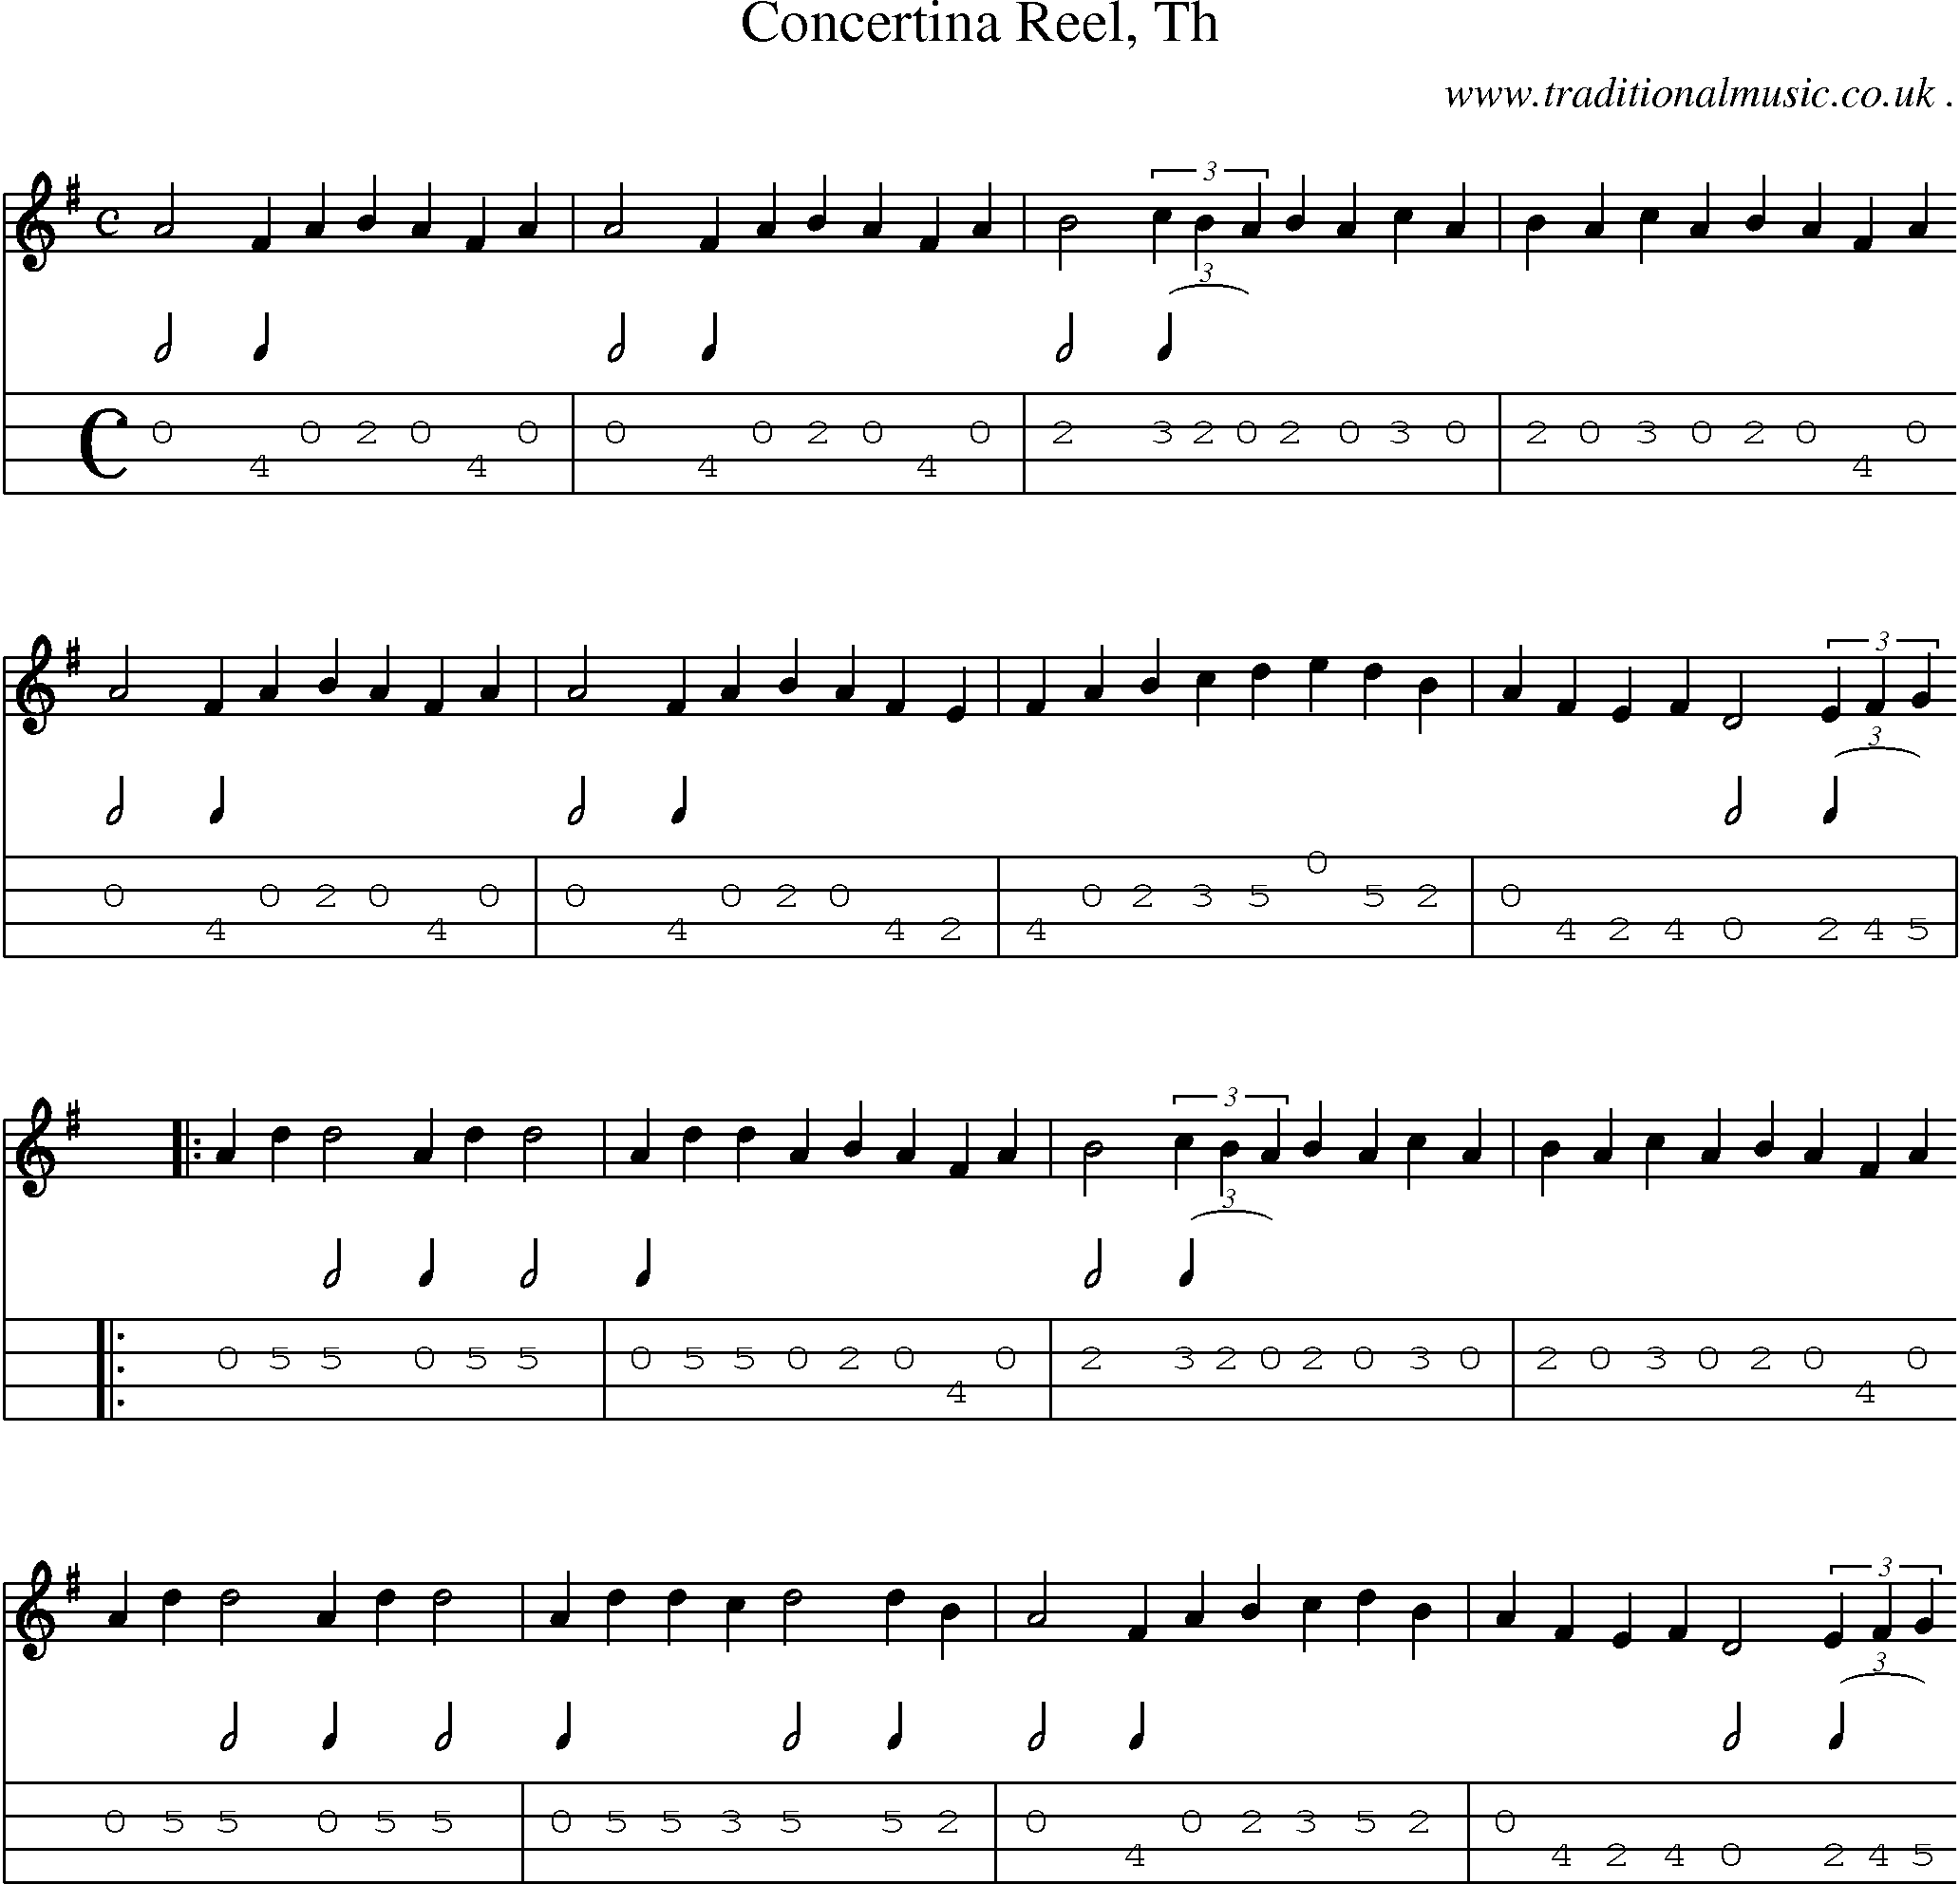 Sheet-Music and Mandolin Tabs for Concertina Reel Th